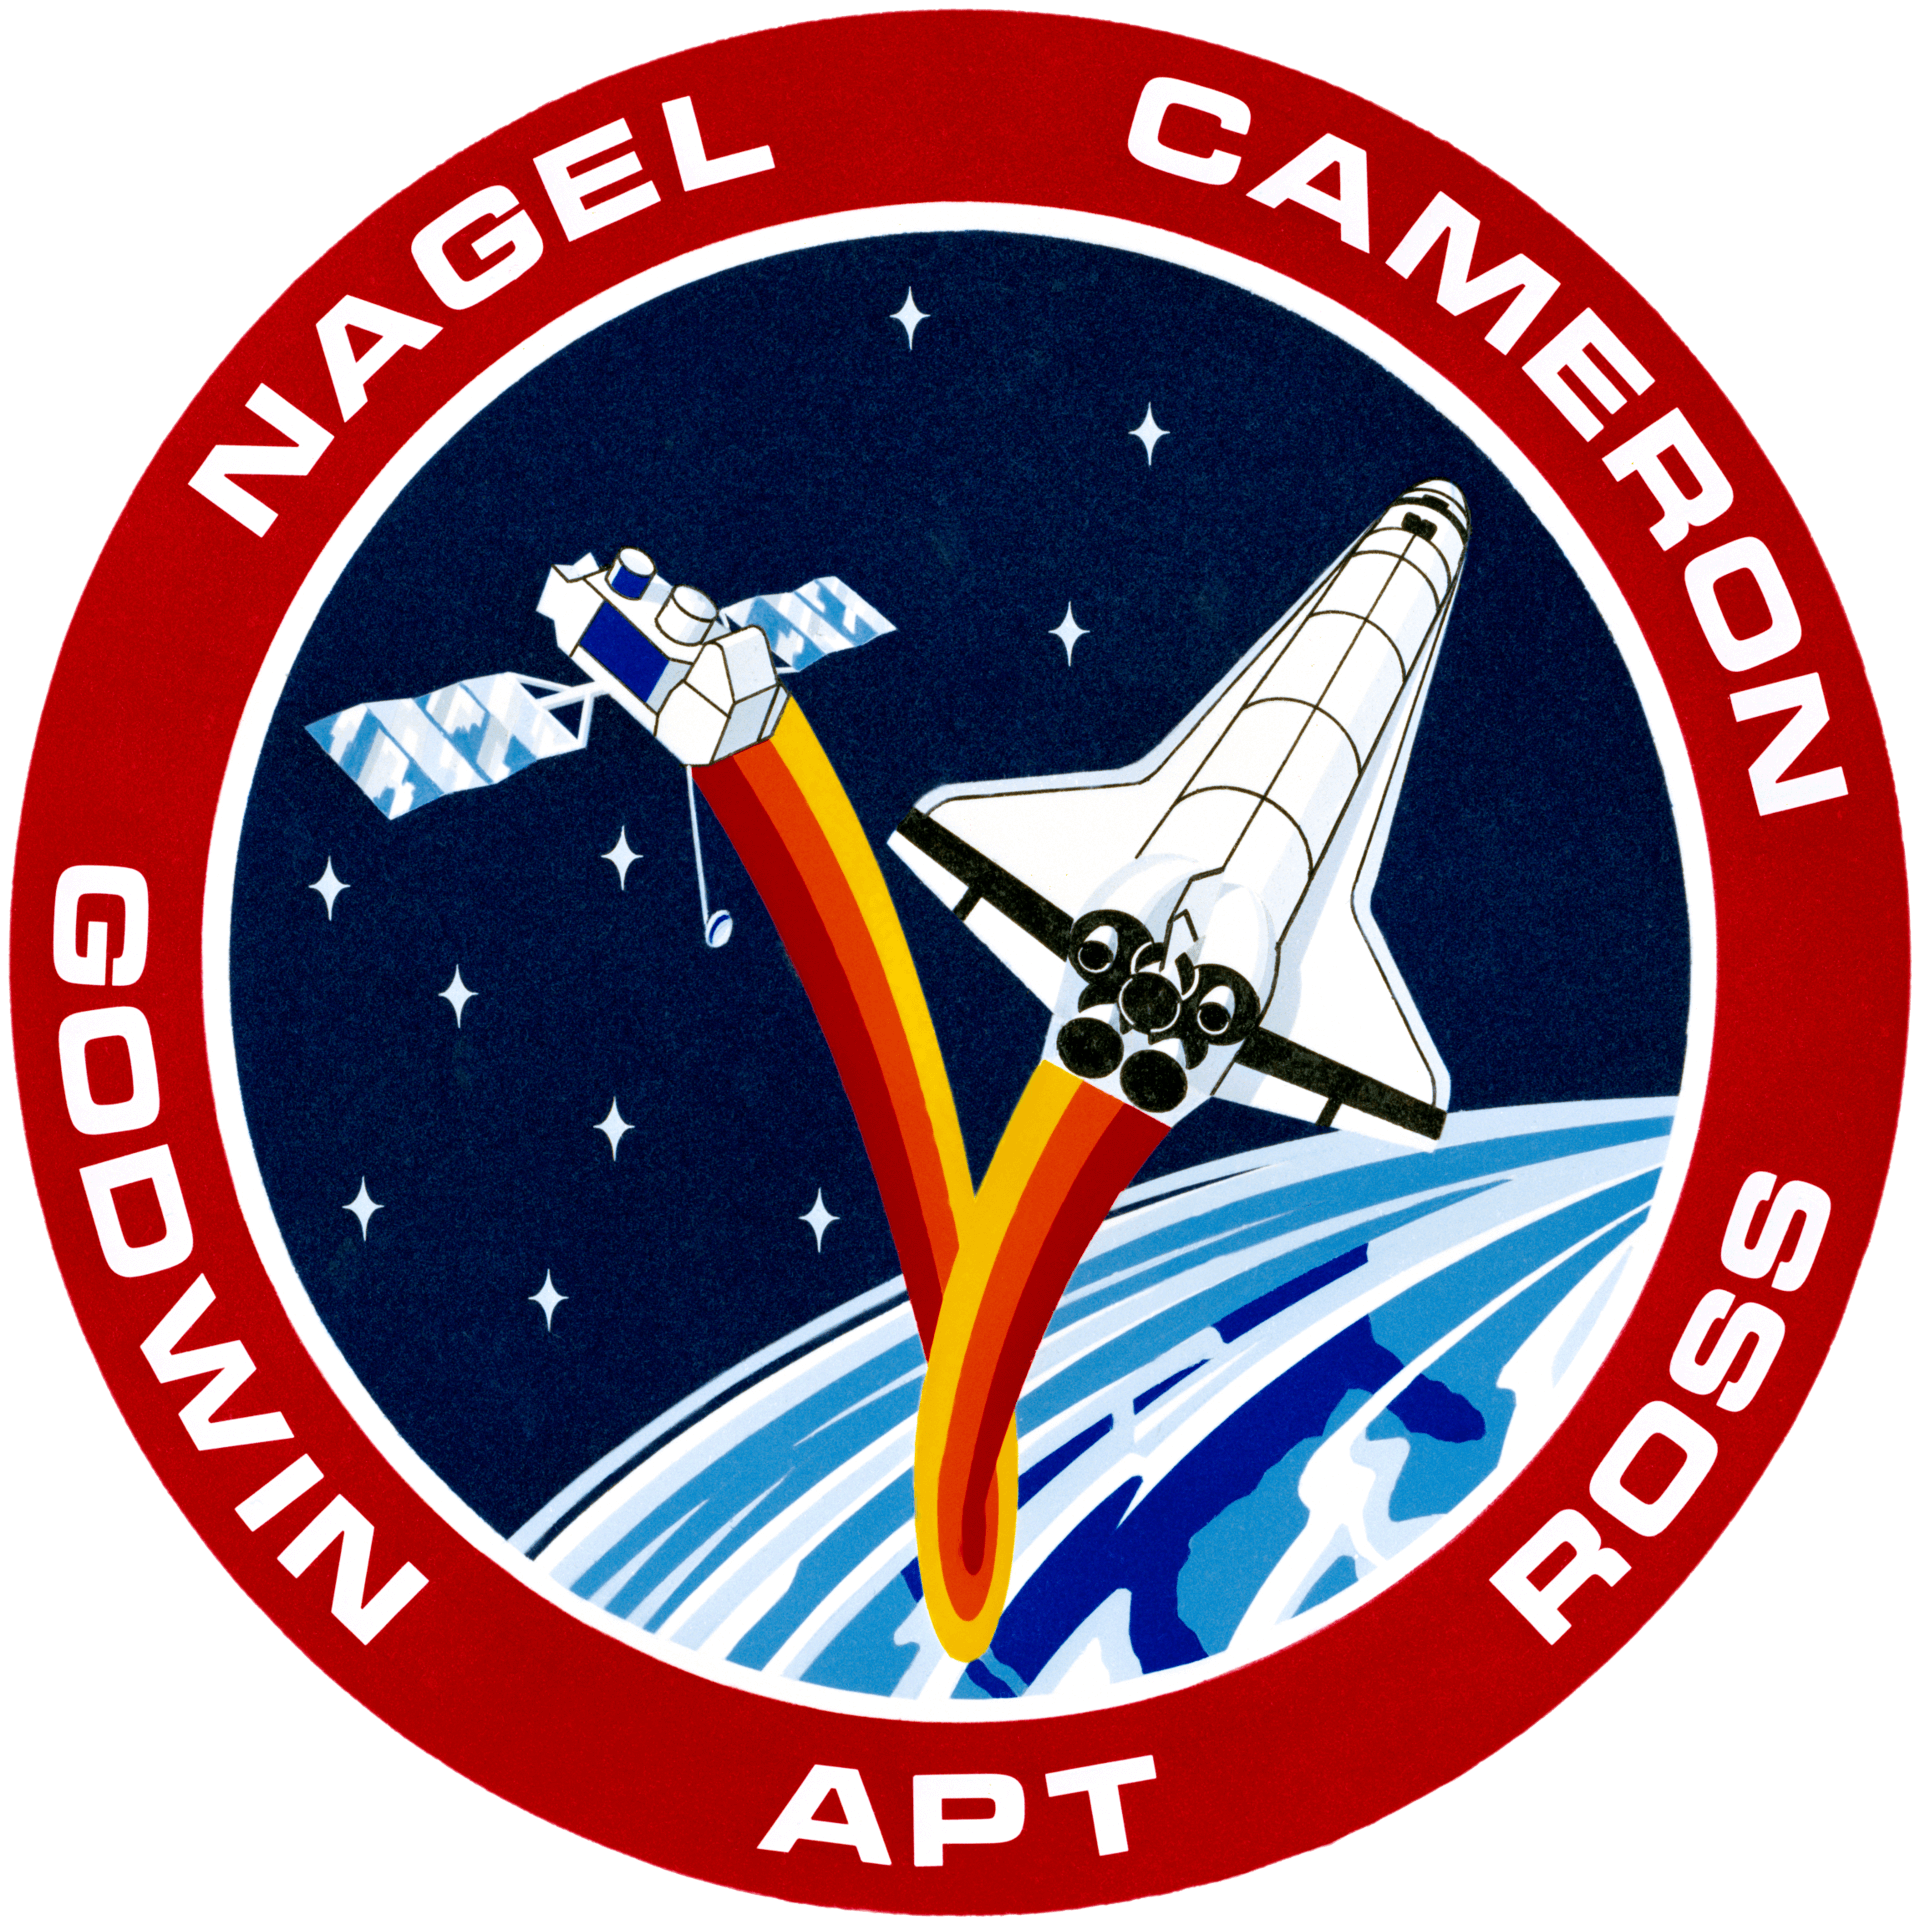 Mission patch for STS-37